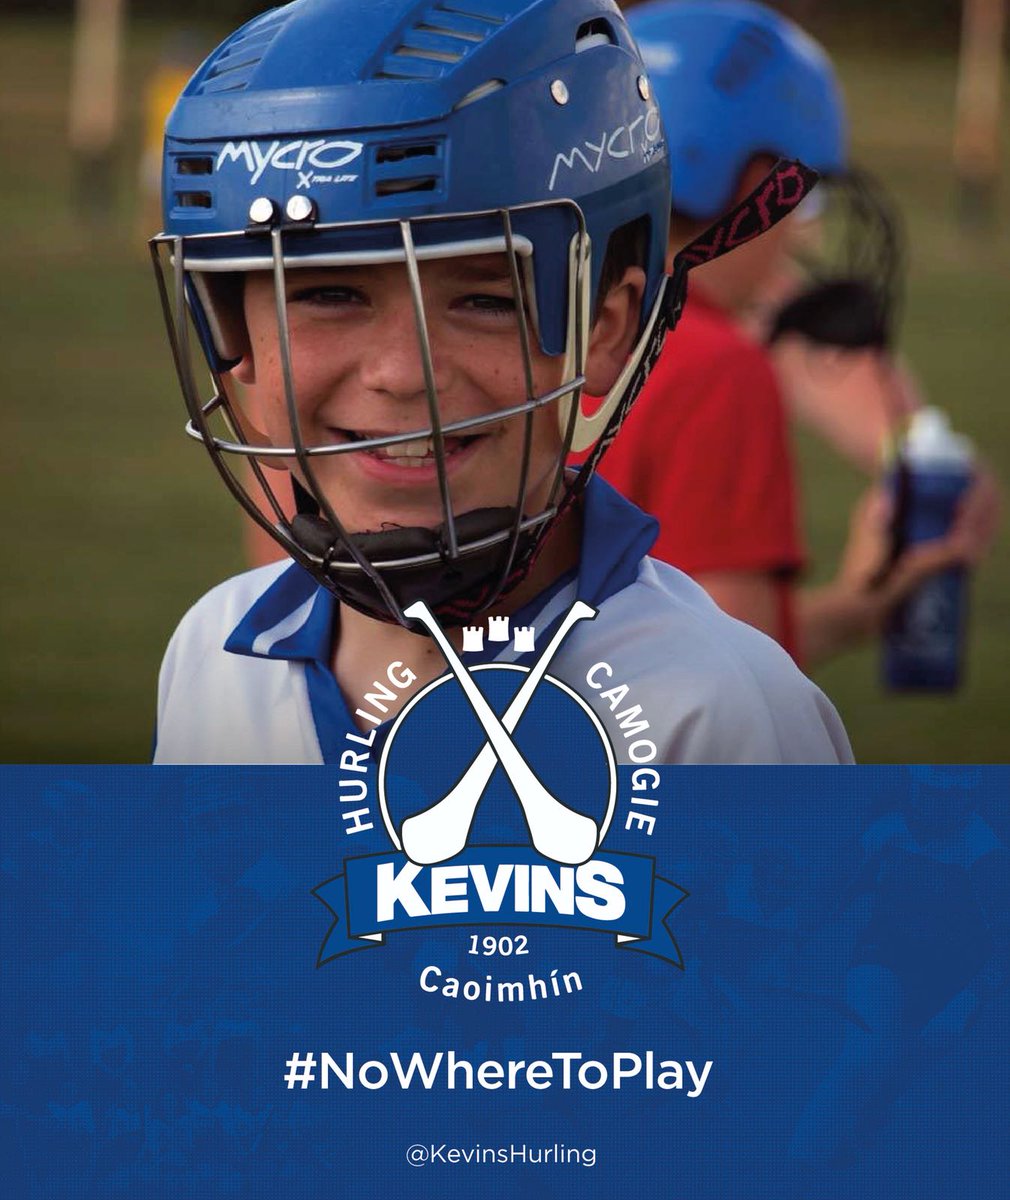 @KevinsHurling Powerful work in the community promoting sport for the youth, an absolute necessity is green space. The future of hurling in Dublin depends on it. #NoWheretoPlay